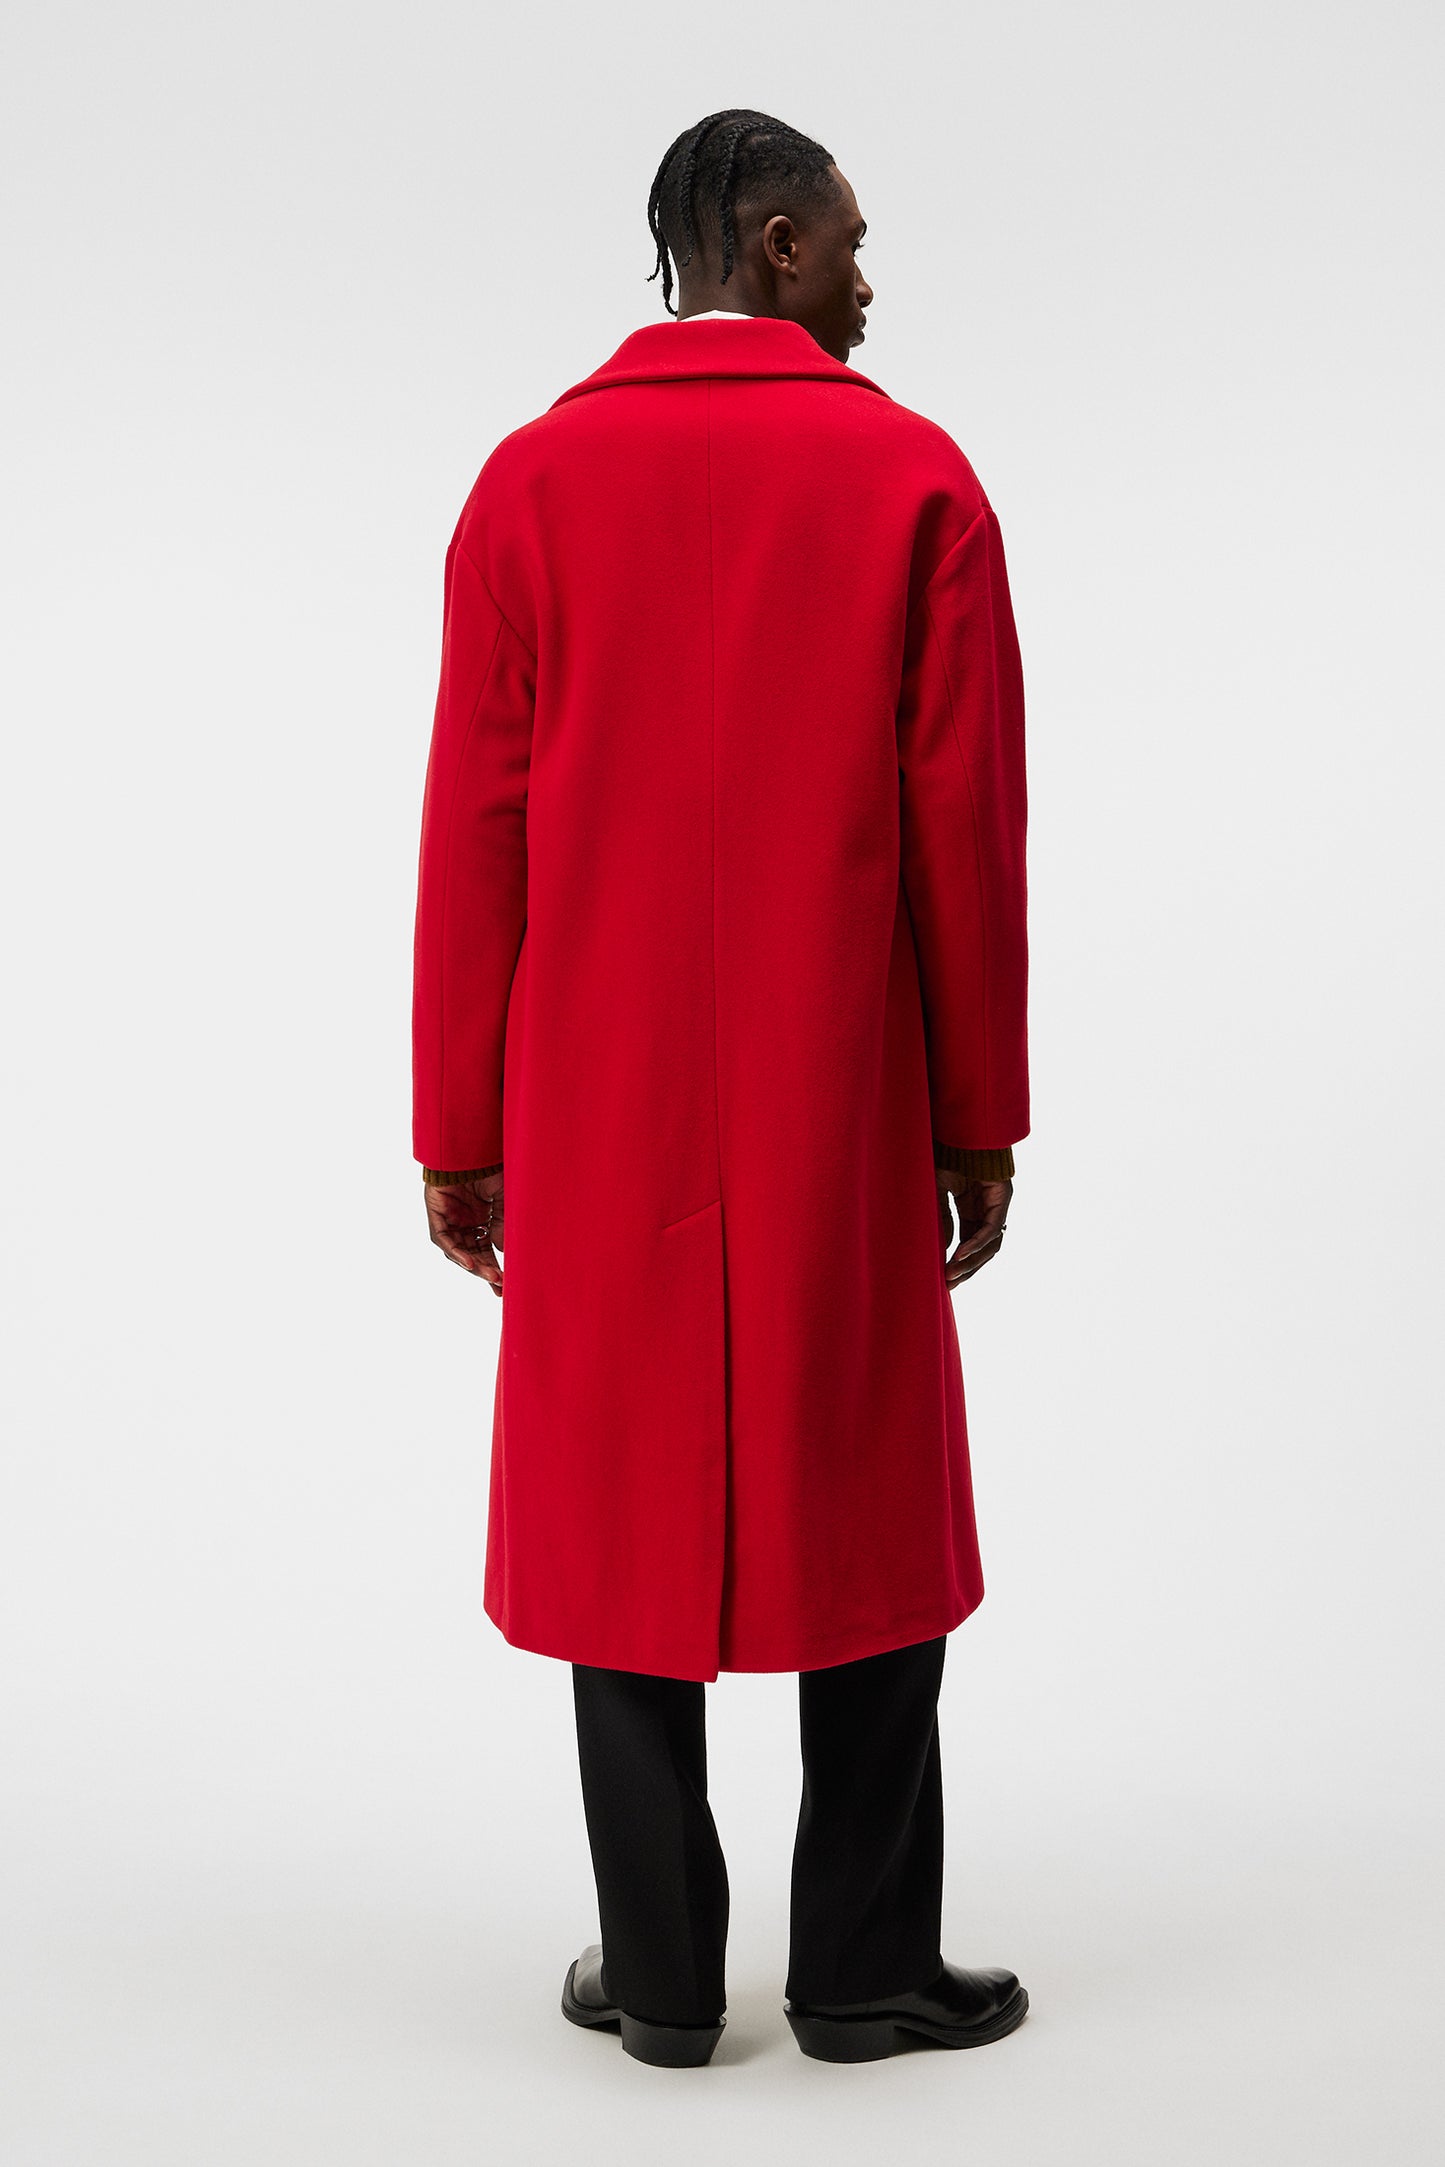 Willy Wool Coat / Fiery Red – J.Lindeberg